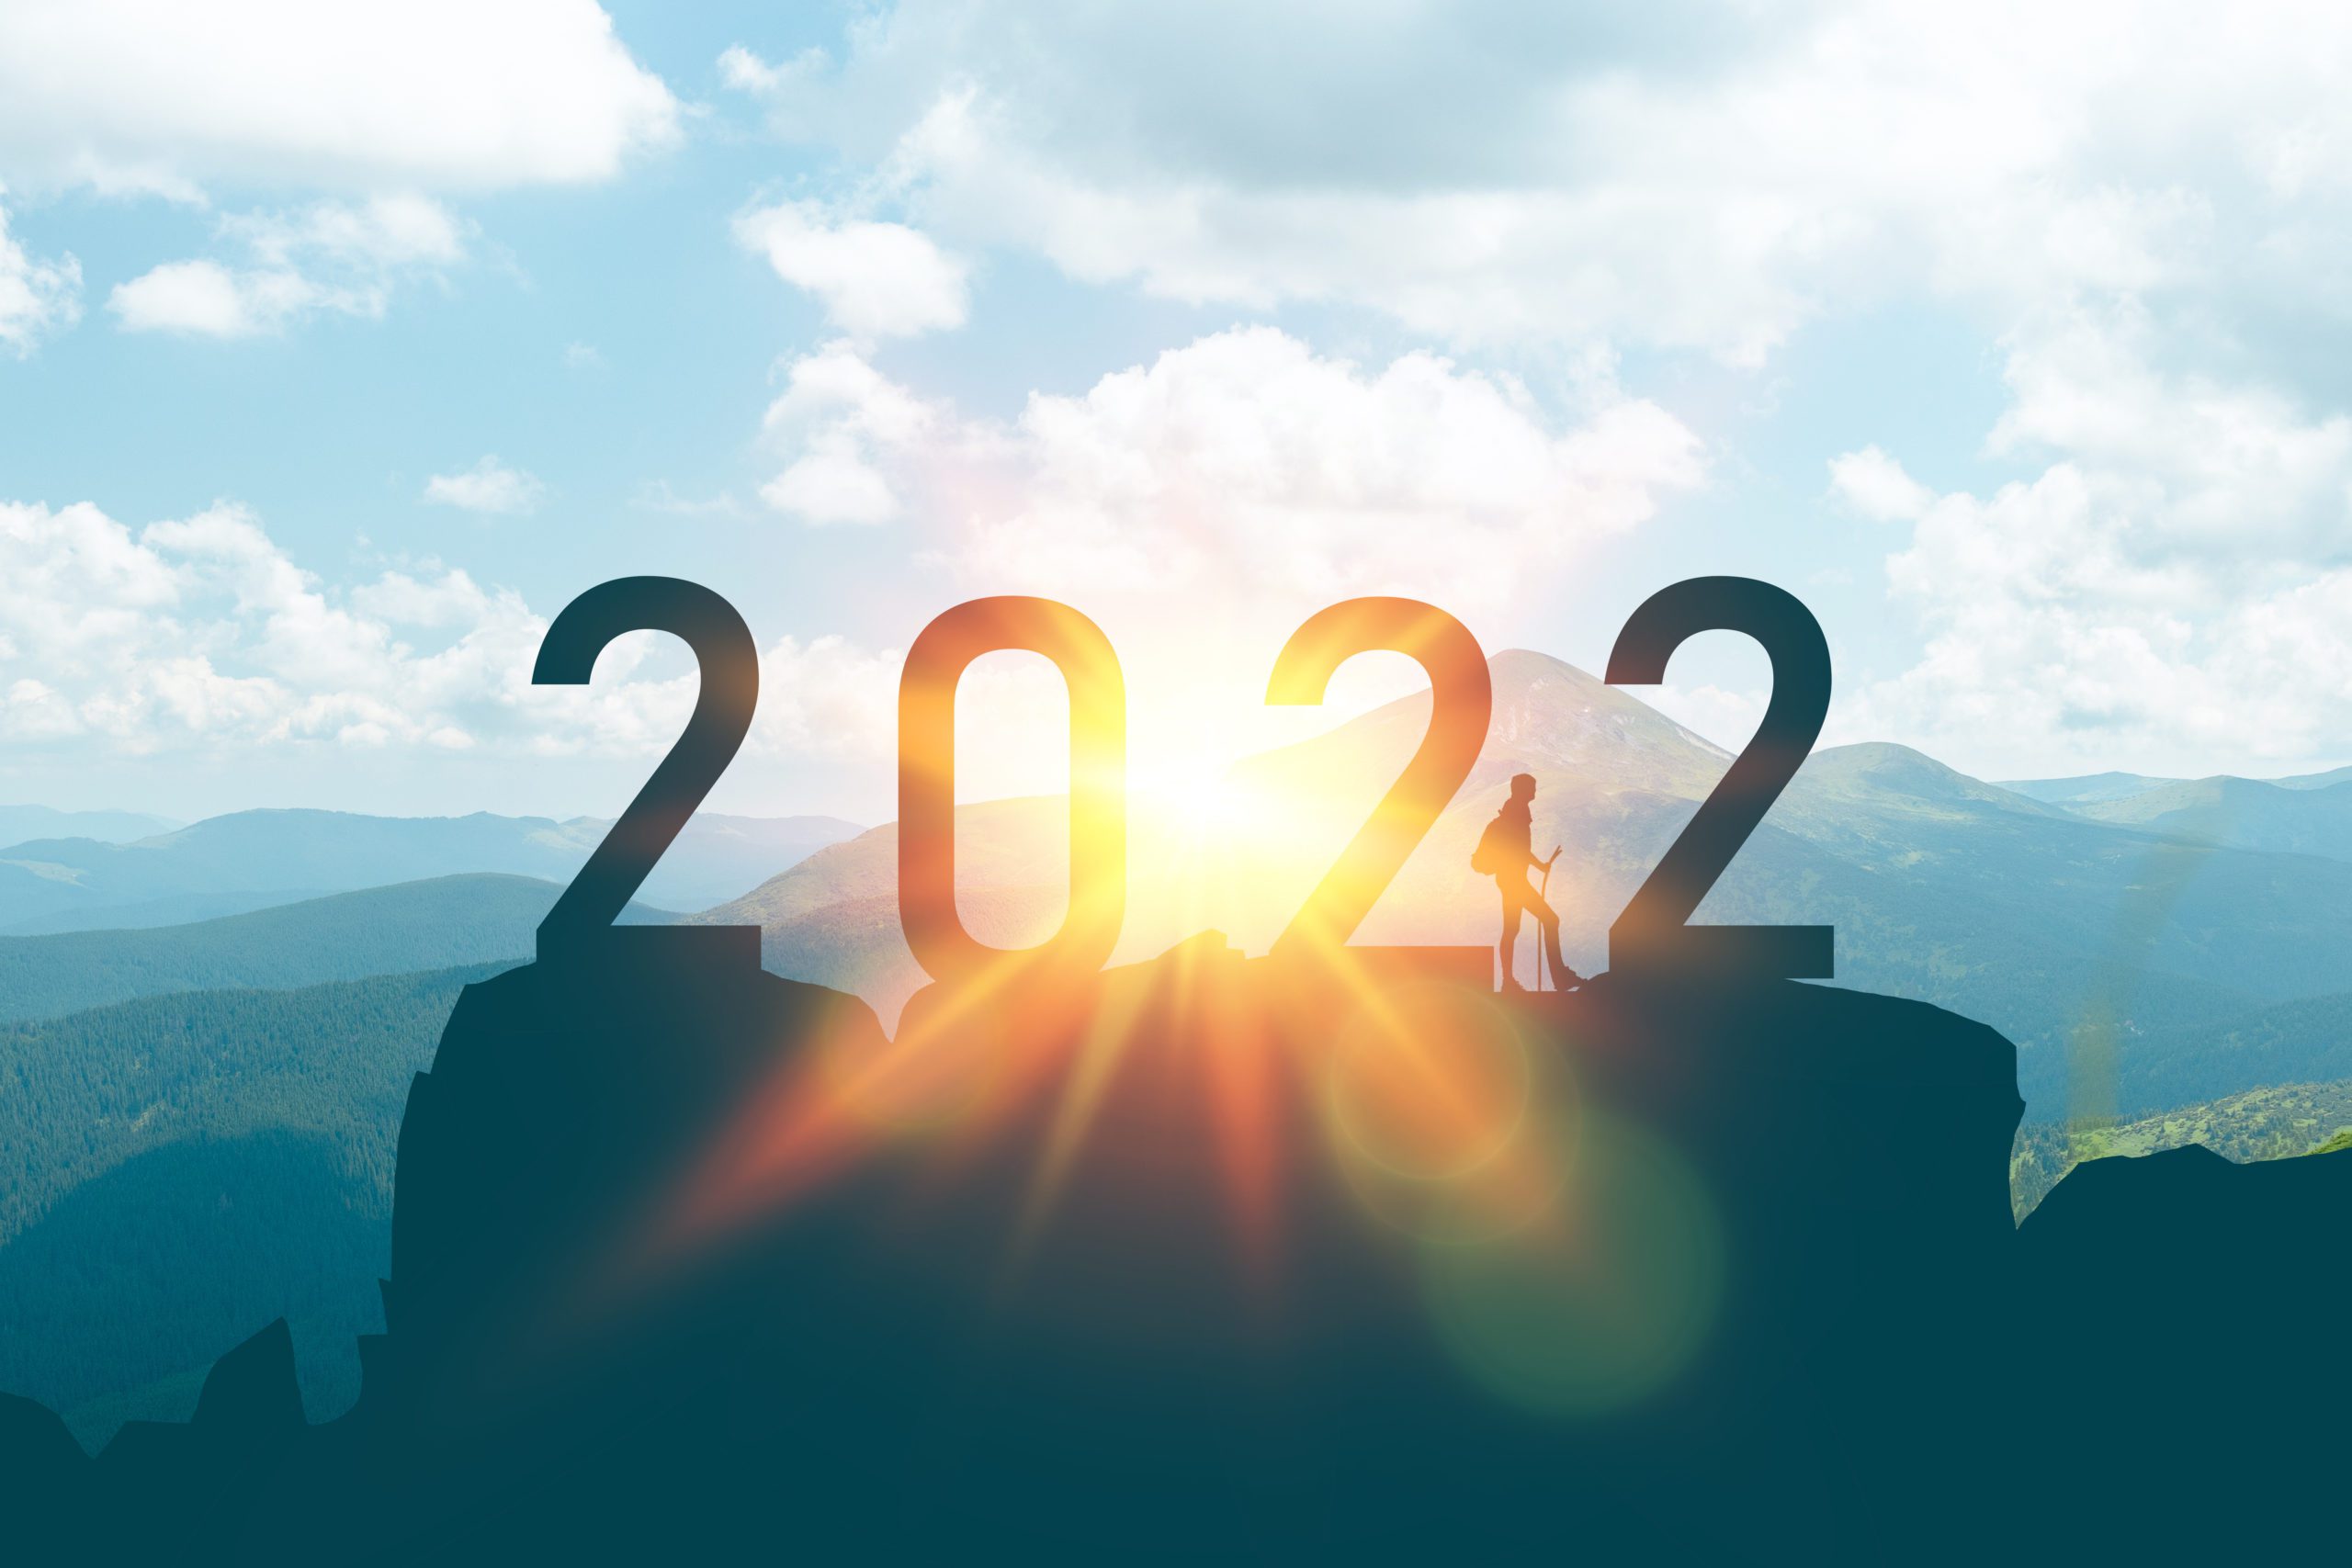 the silhouette of the number 2022 on a mountain top as the sun rises behind and a man stands nearby